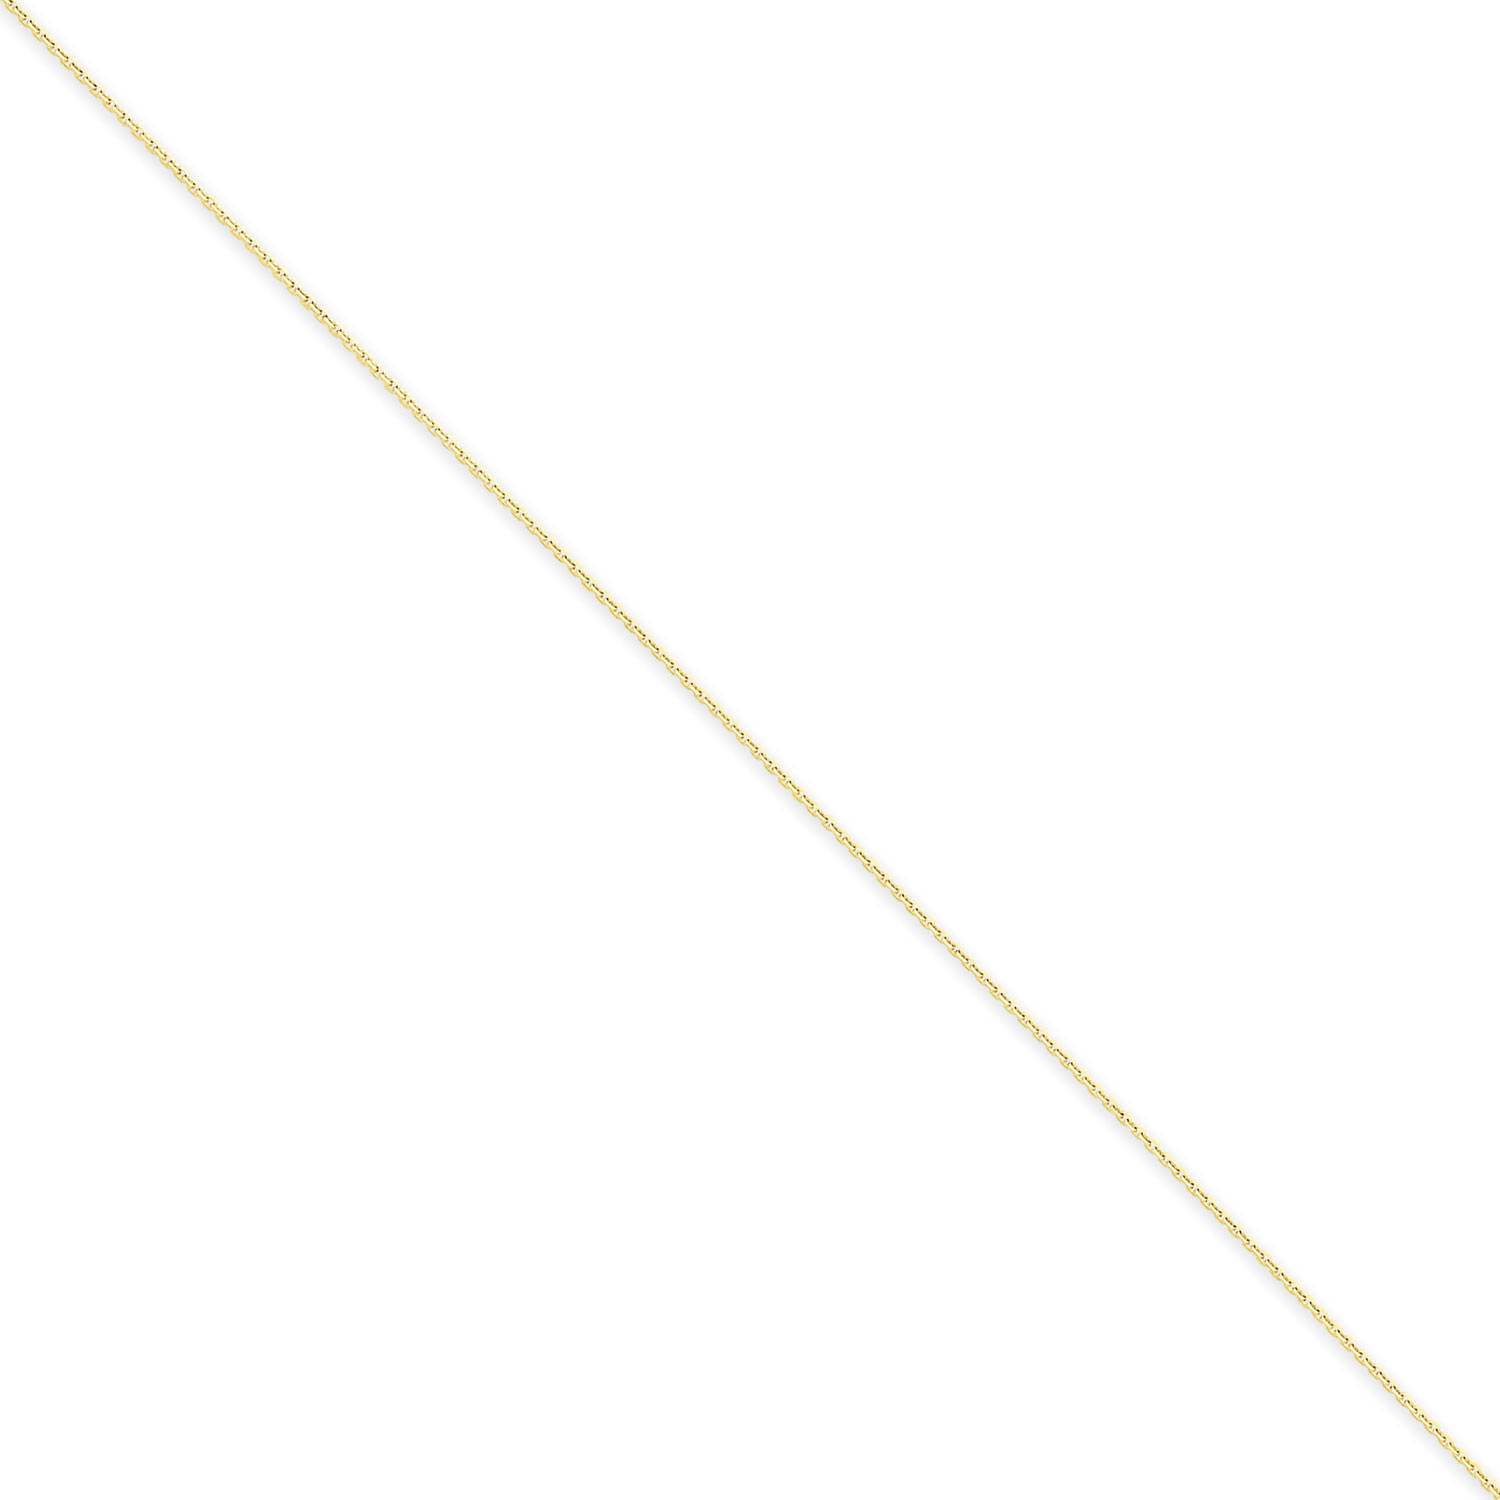 Details about   Real 14kt Yellow Gold .8mm Diamond Cut Cable Chain; 18 inch 